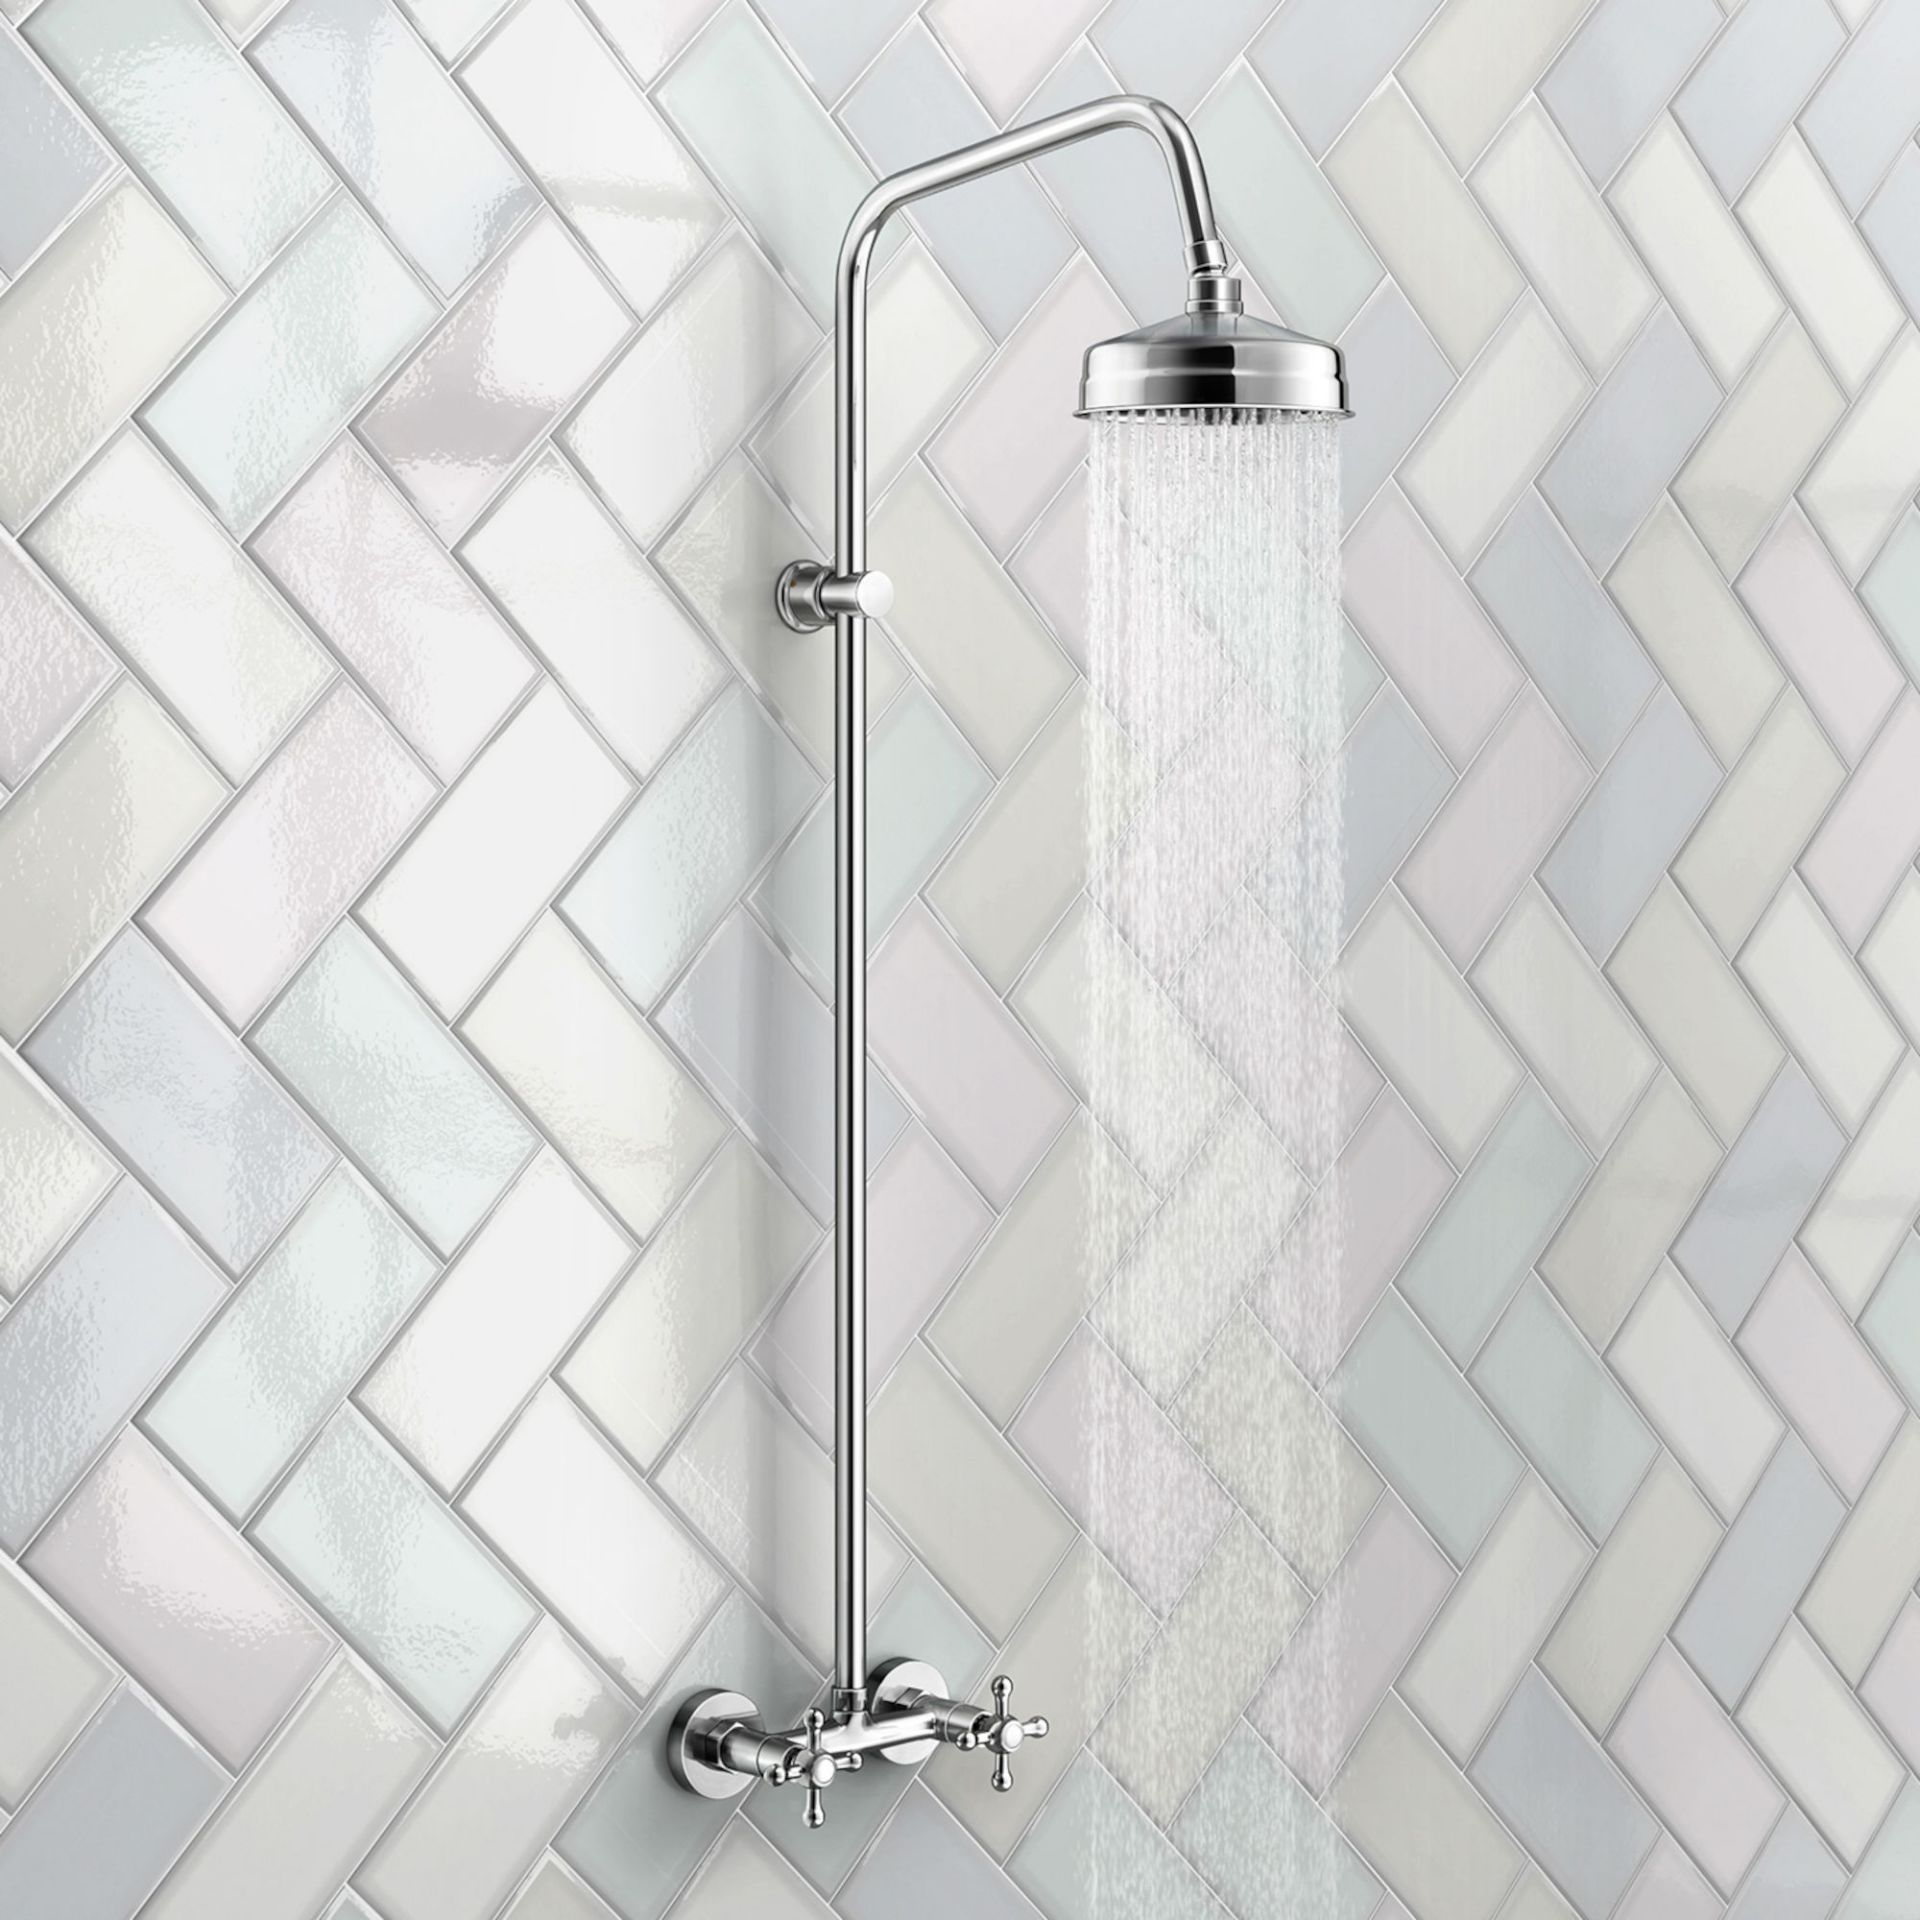 (TP109) Traditional Exposed Shower & Medium Head Exposed design makes for a statement piece Stunning